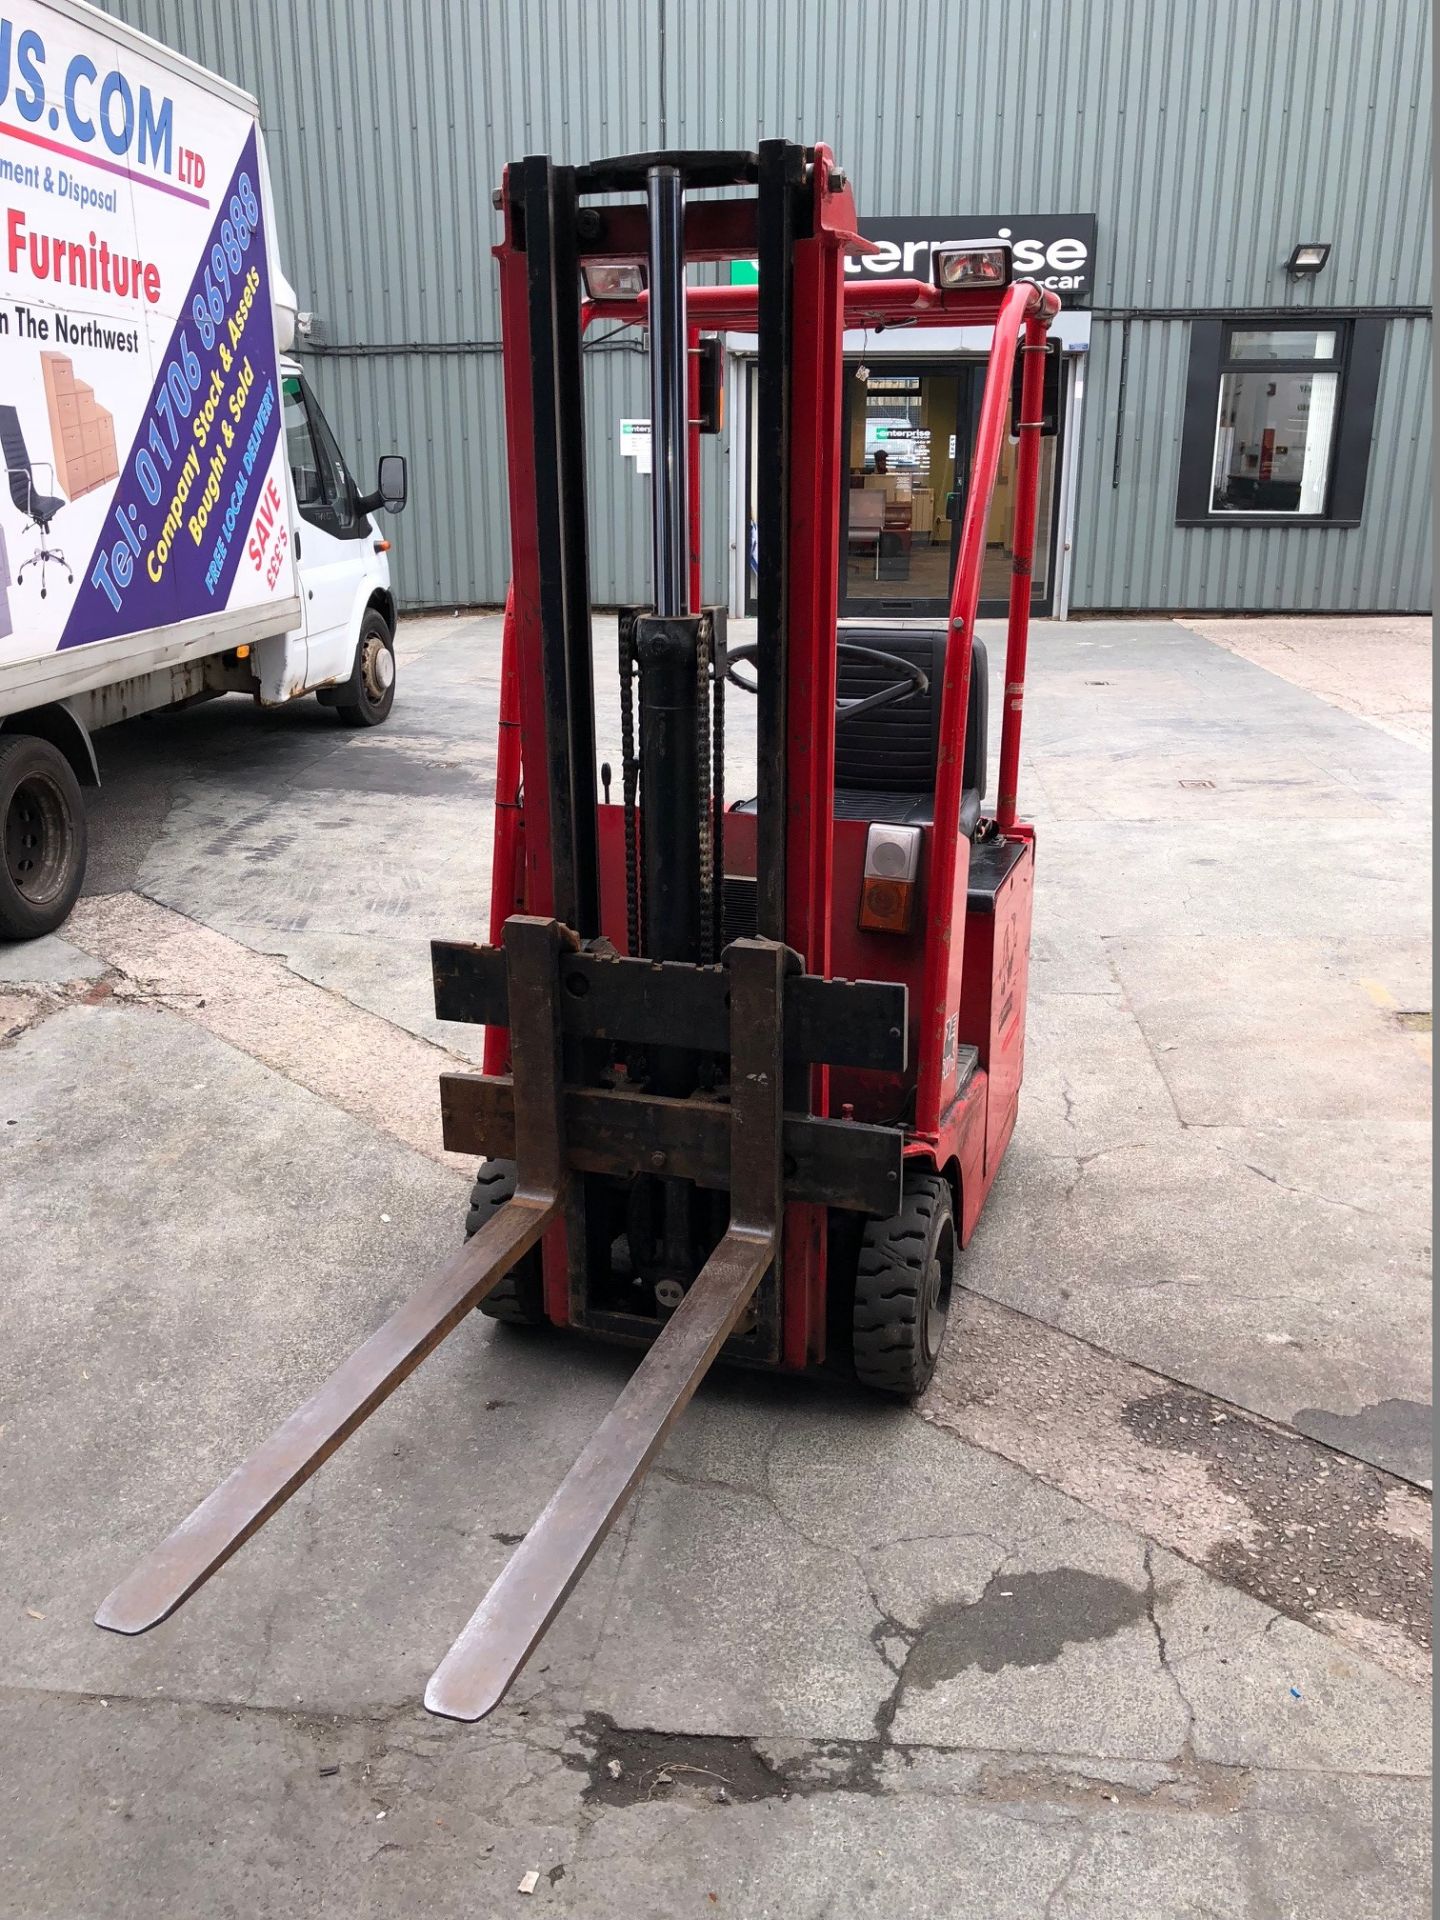 Lansing Bagnall Electric Forklift Truck - Model FGER1.21.0 (Spares/Repairs) - Image 2 of 8